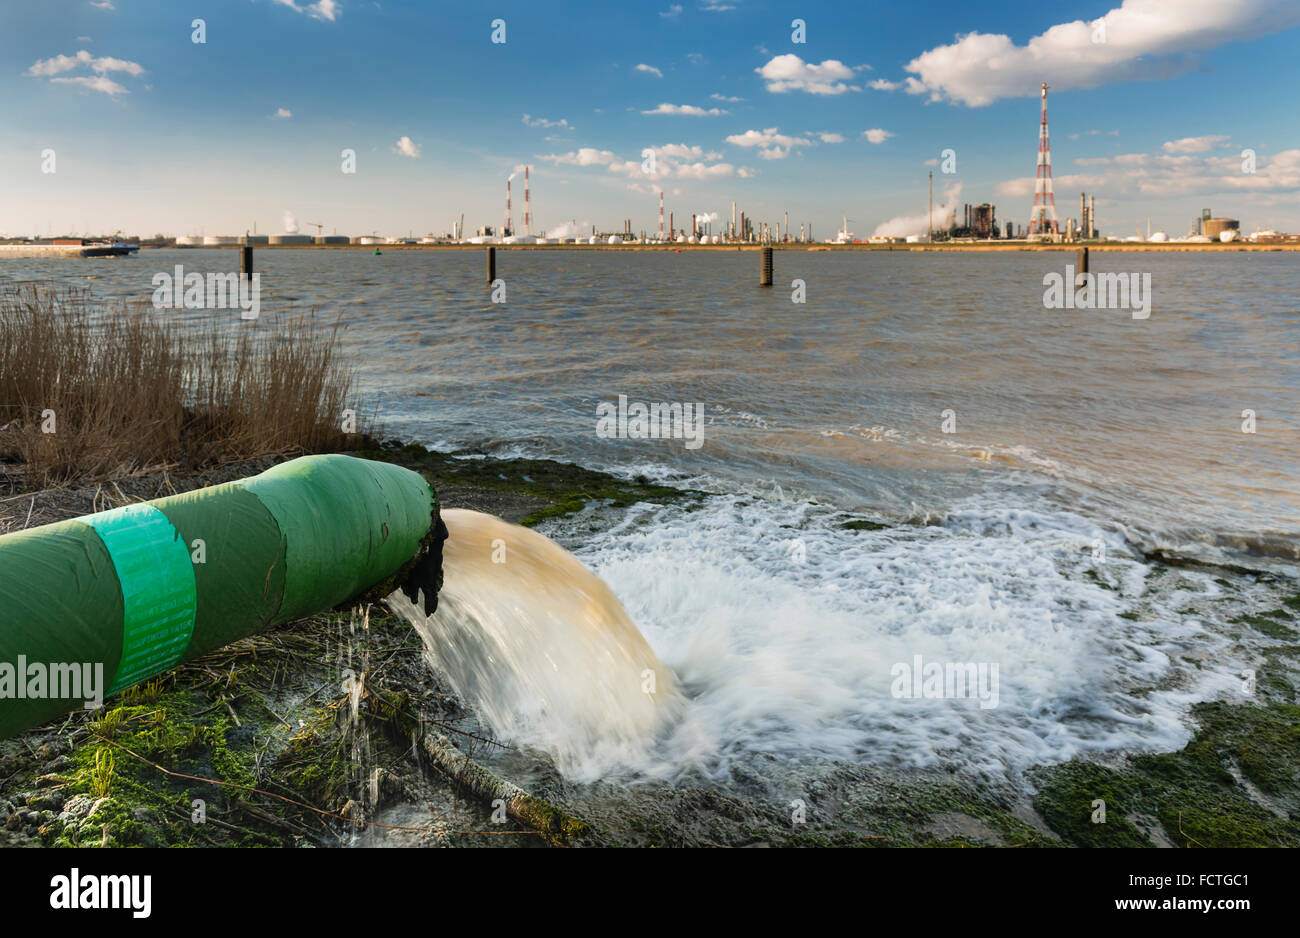 A wastewater pipe and a large oil refinery in the harbor of Antwerp, Belgium with blue sky and warm evening light. Stock Photo